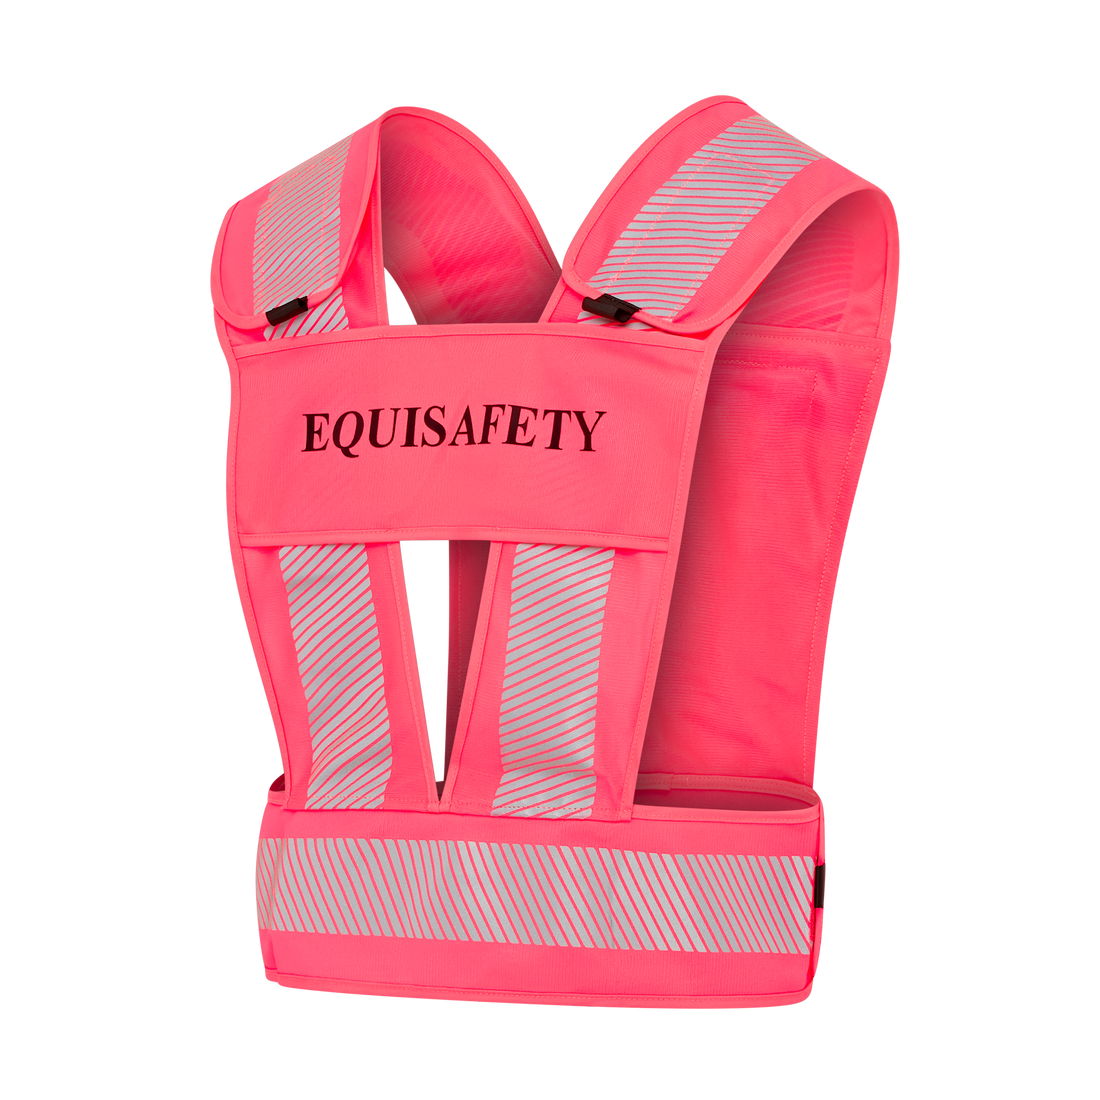 Adjustable Reflective Harness with pocket - PINK